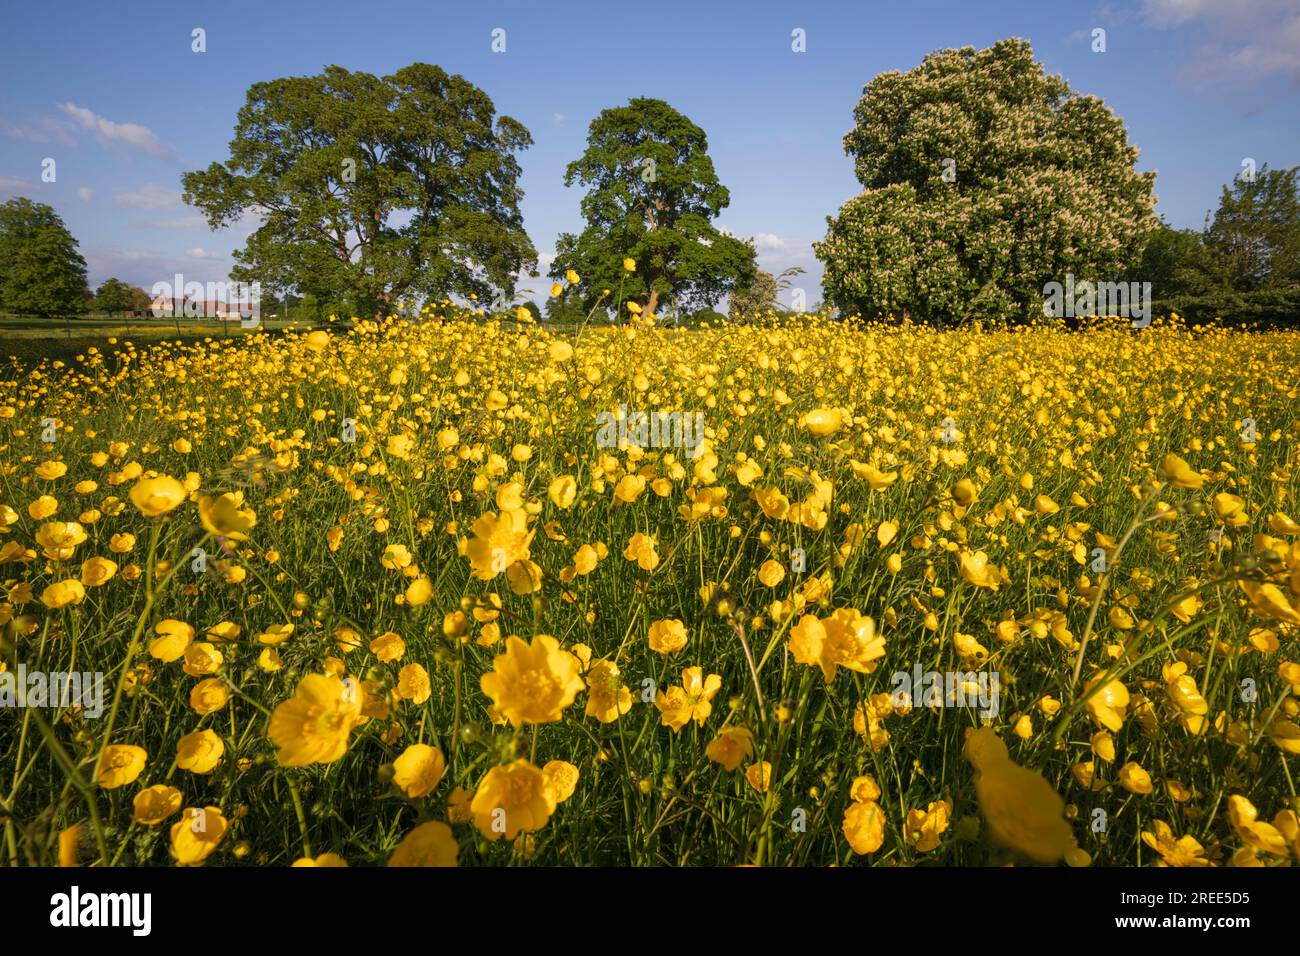 Yellow buttercups growing in wild flower meadow with oak trees and blue sky, Newbury, Berkshire, England, United Kingdom, Europe Stock Photo